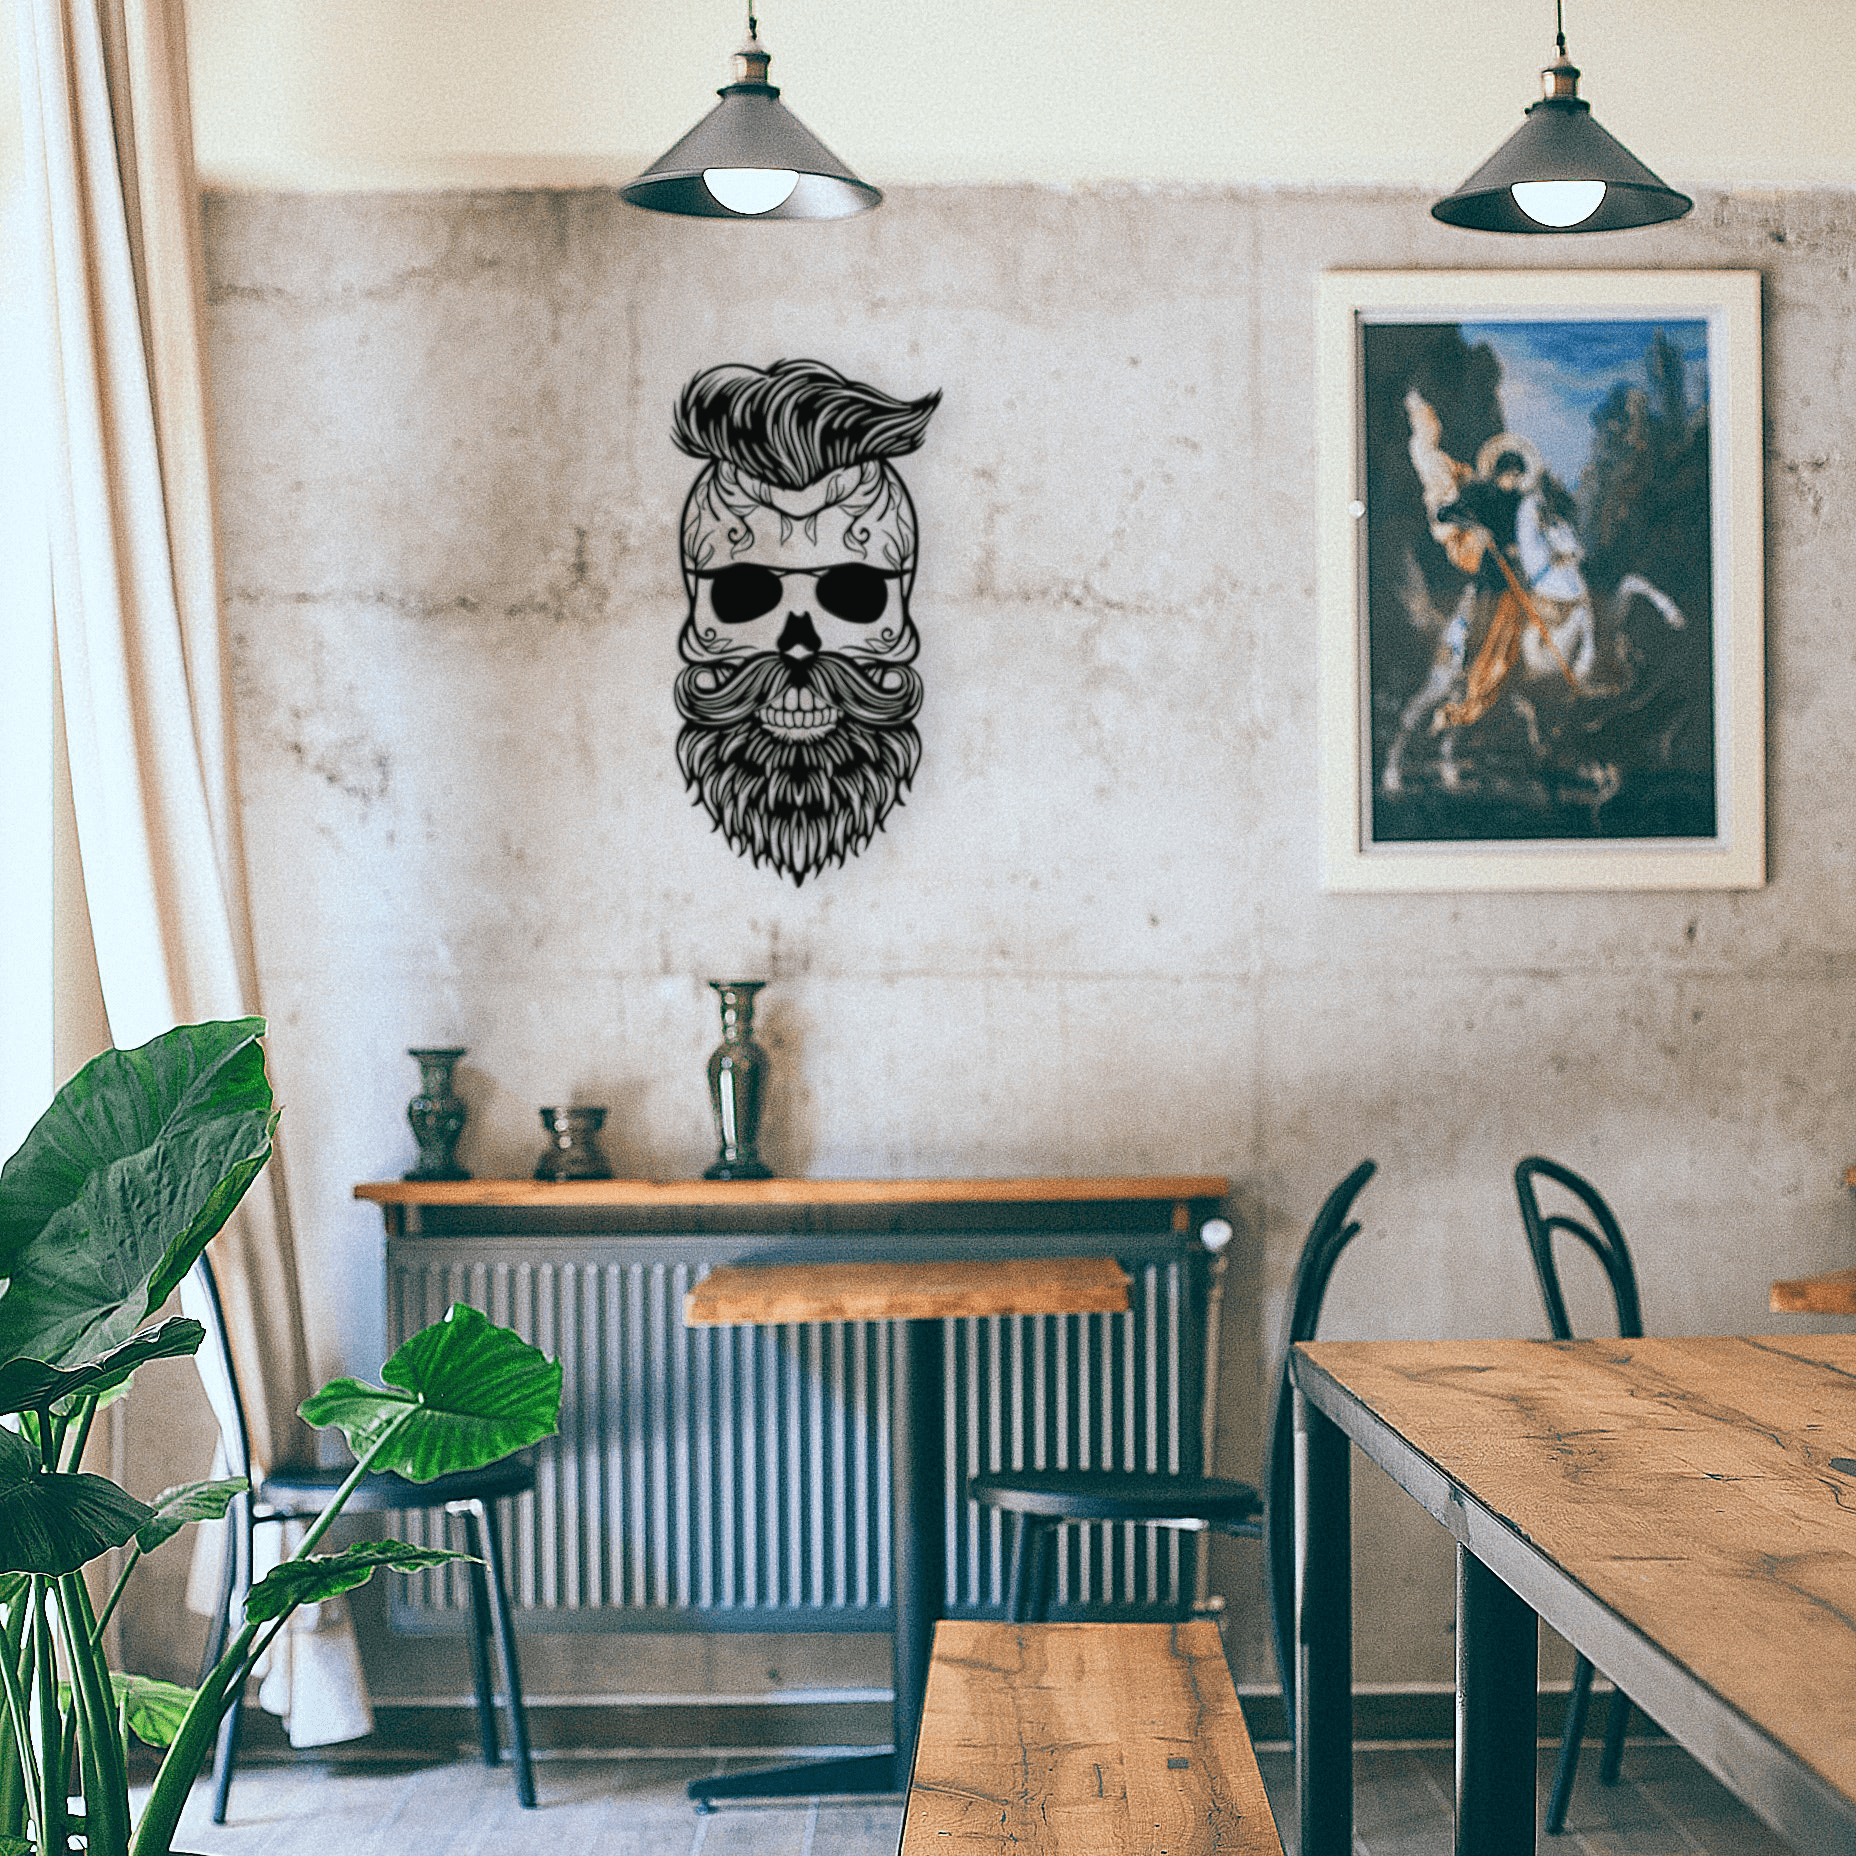 Bearded skull face with sunglasses, gothic, biker, barber, tattoo parlour